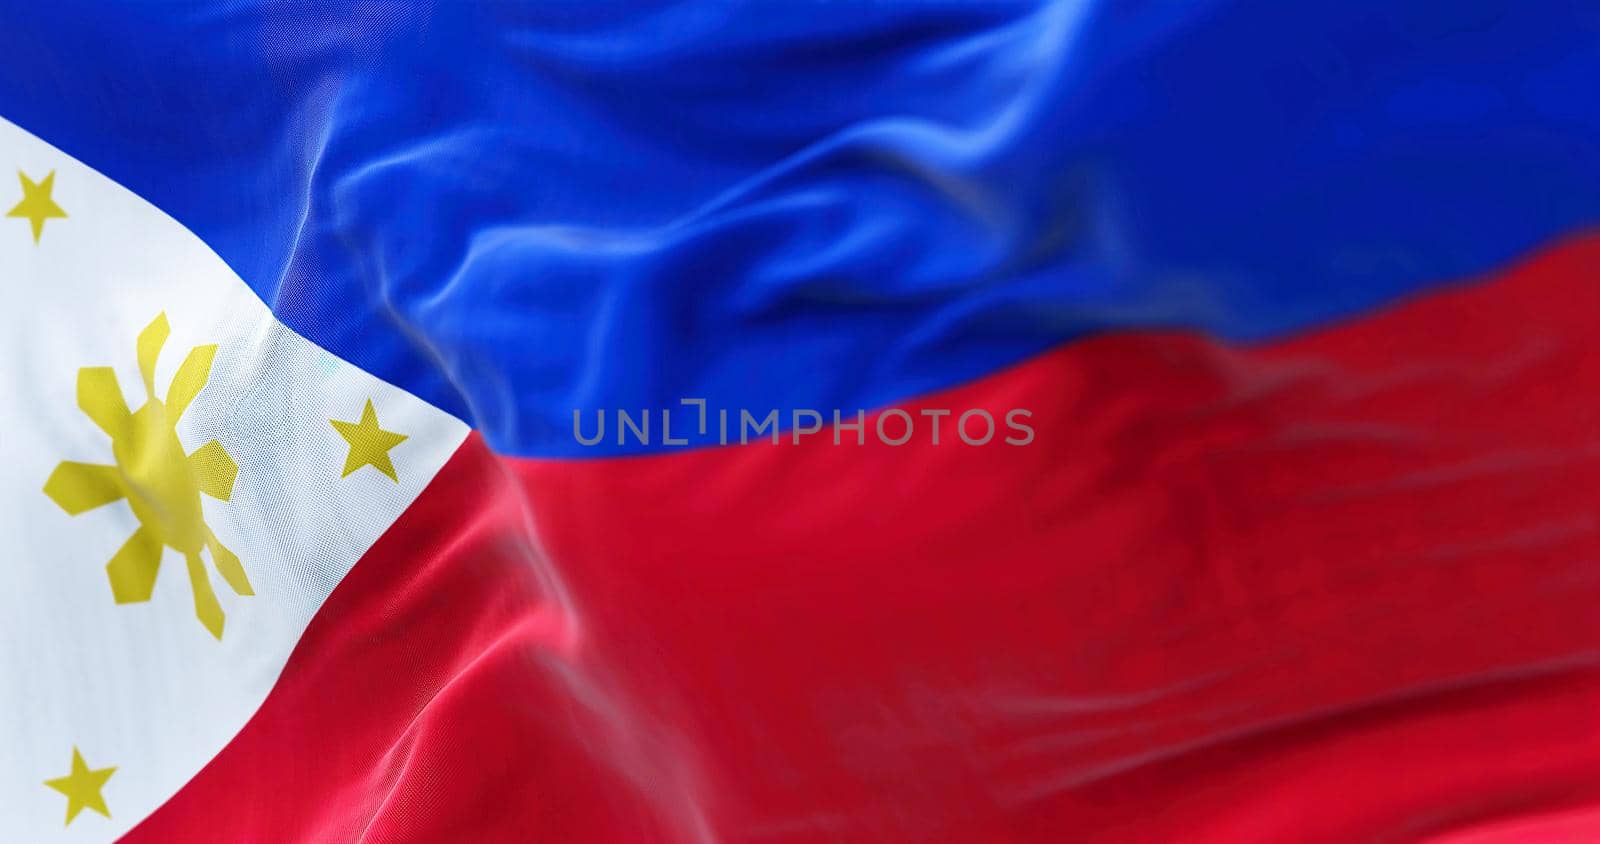 Close-up view of the Philippines national flag waving in the wind by rarrarorro